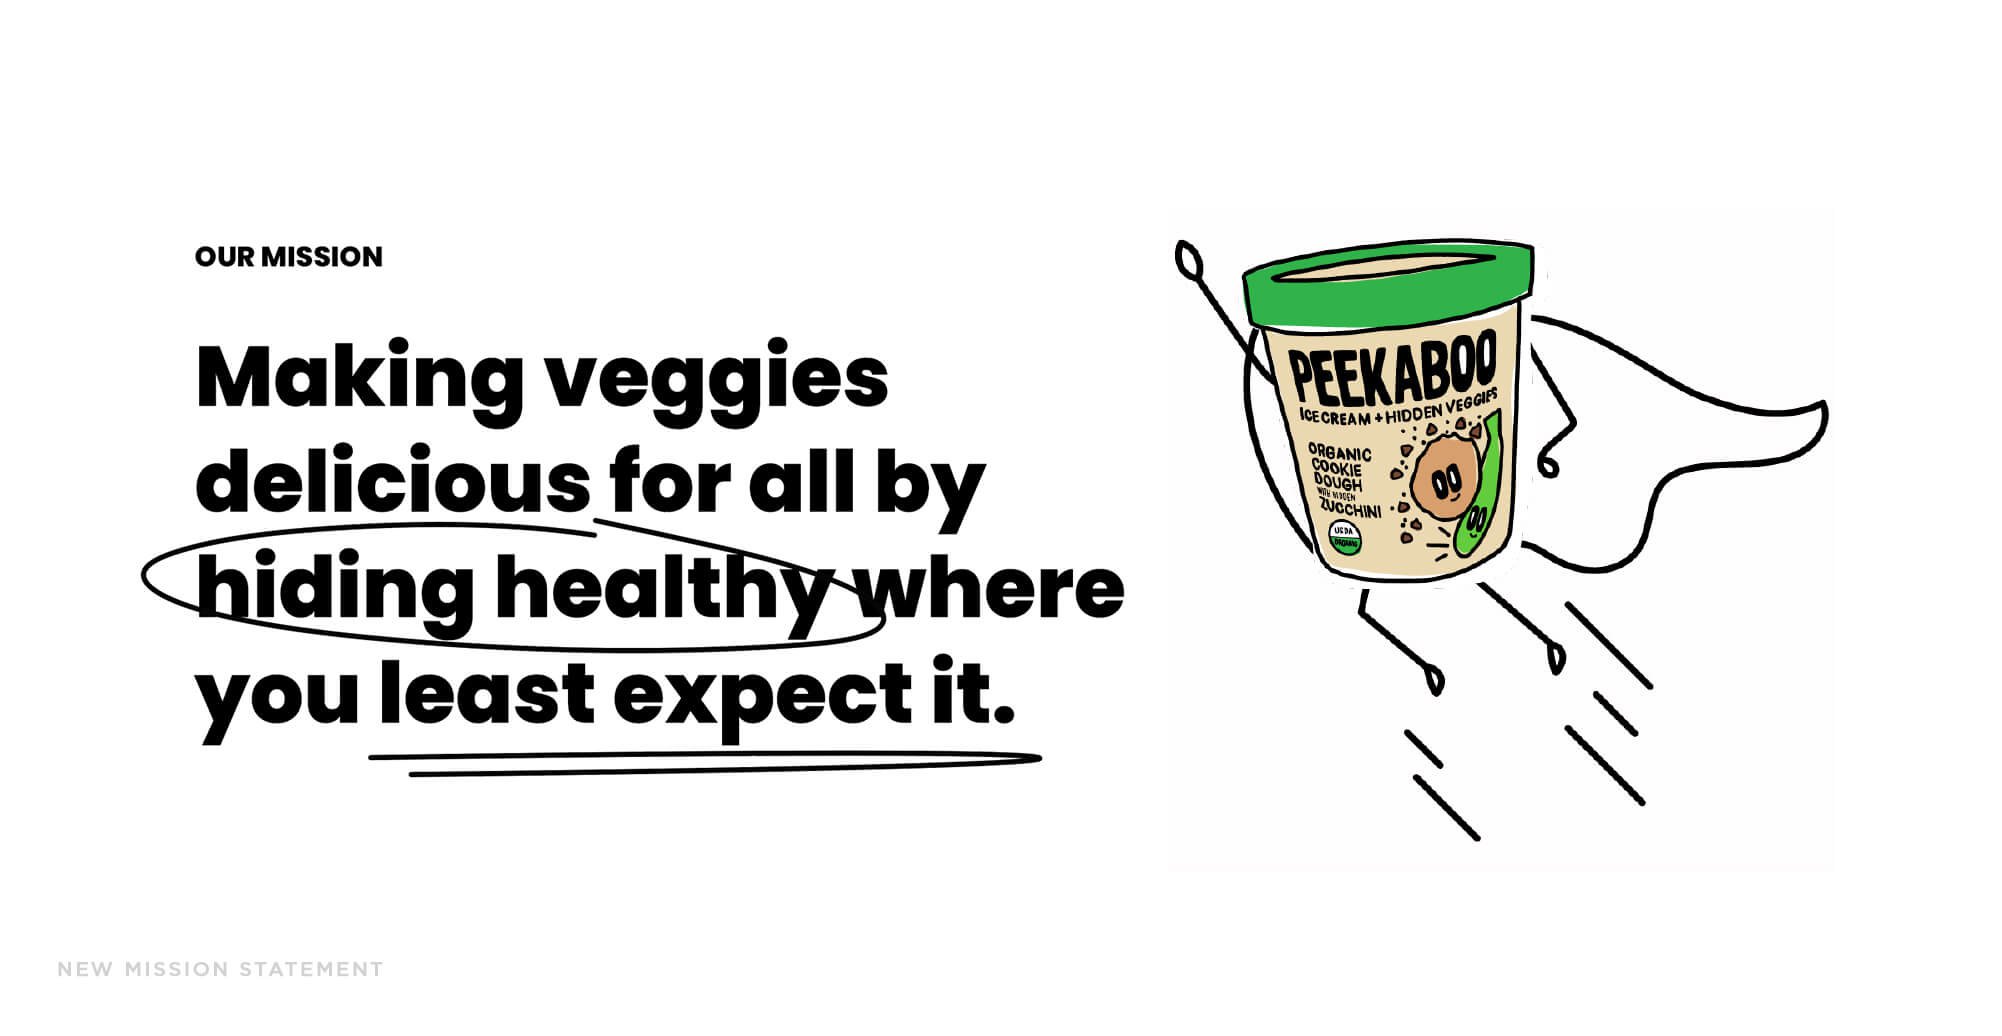 Jacober rebranding of Peekaboo Ice Cream. Photo of new mission statement: "Making veggies delicious for all by hiding healthy where you least expect it." and illustration of super hero pint